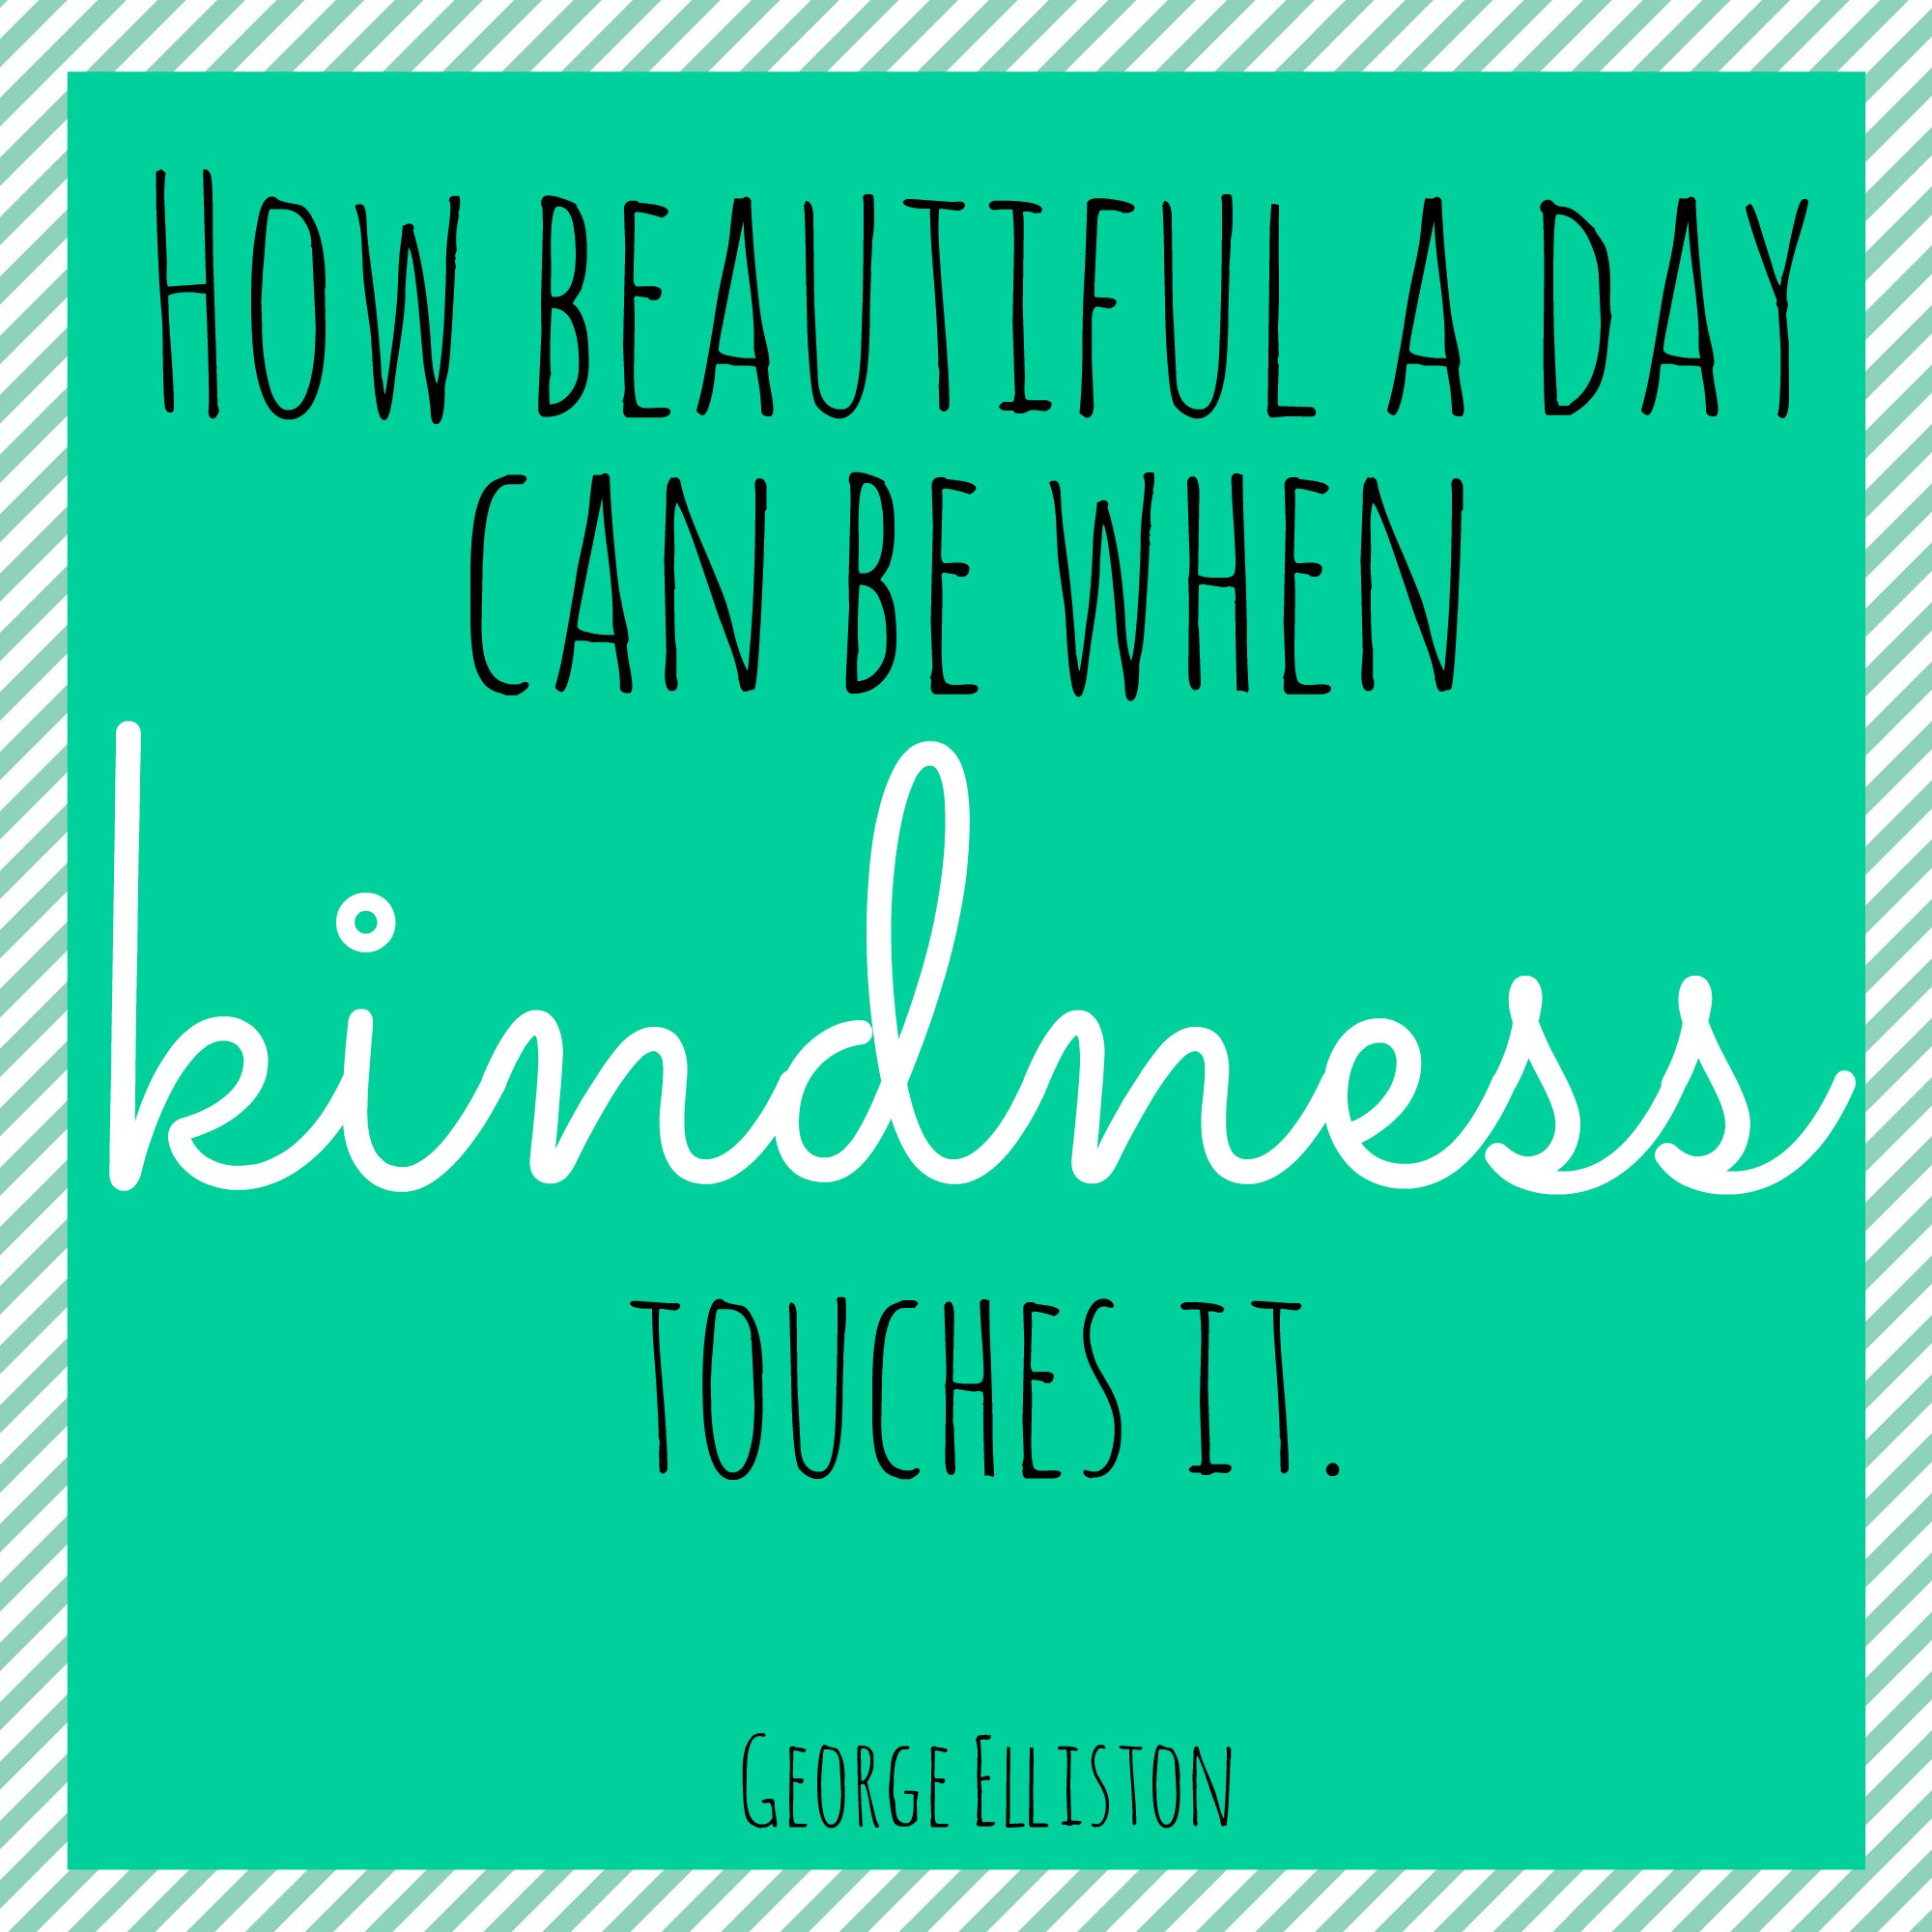 Quotes About Kindness To Others
 Random Acts of Kindness Ideas 21 40 100 Days of Kindness